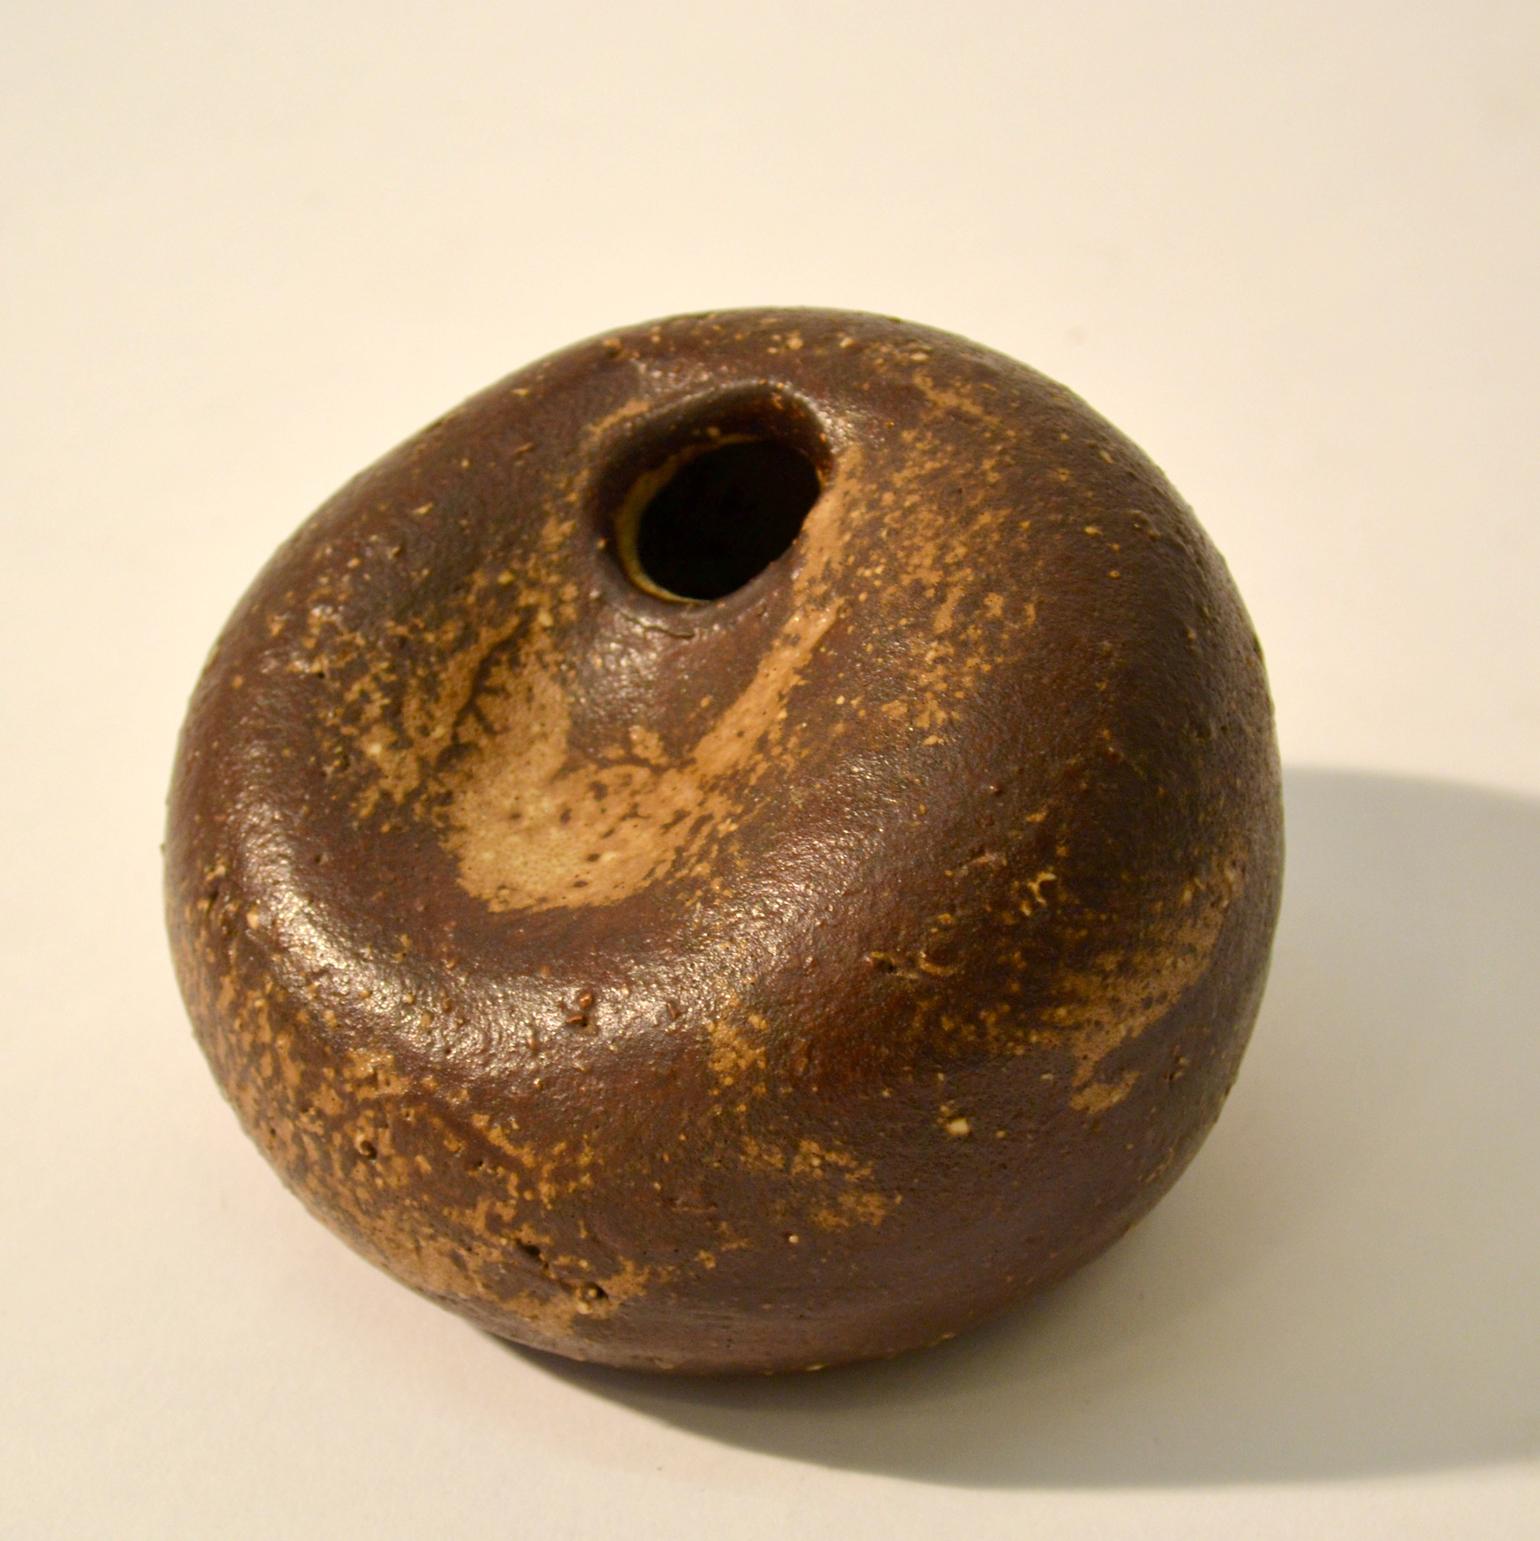 Group of Studio Ceramic Free Form Pebble Vases in Earth Tones by Jaan Mobach For Sale 2